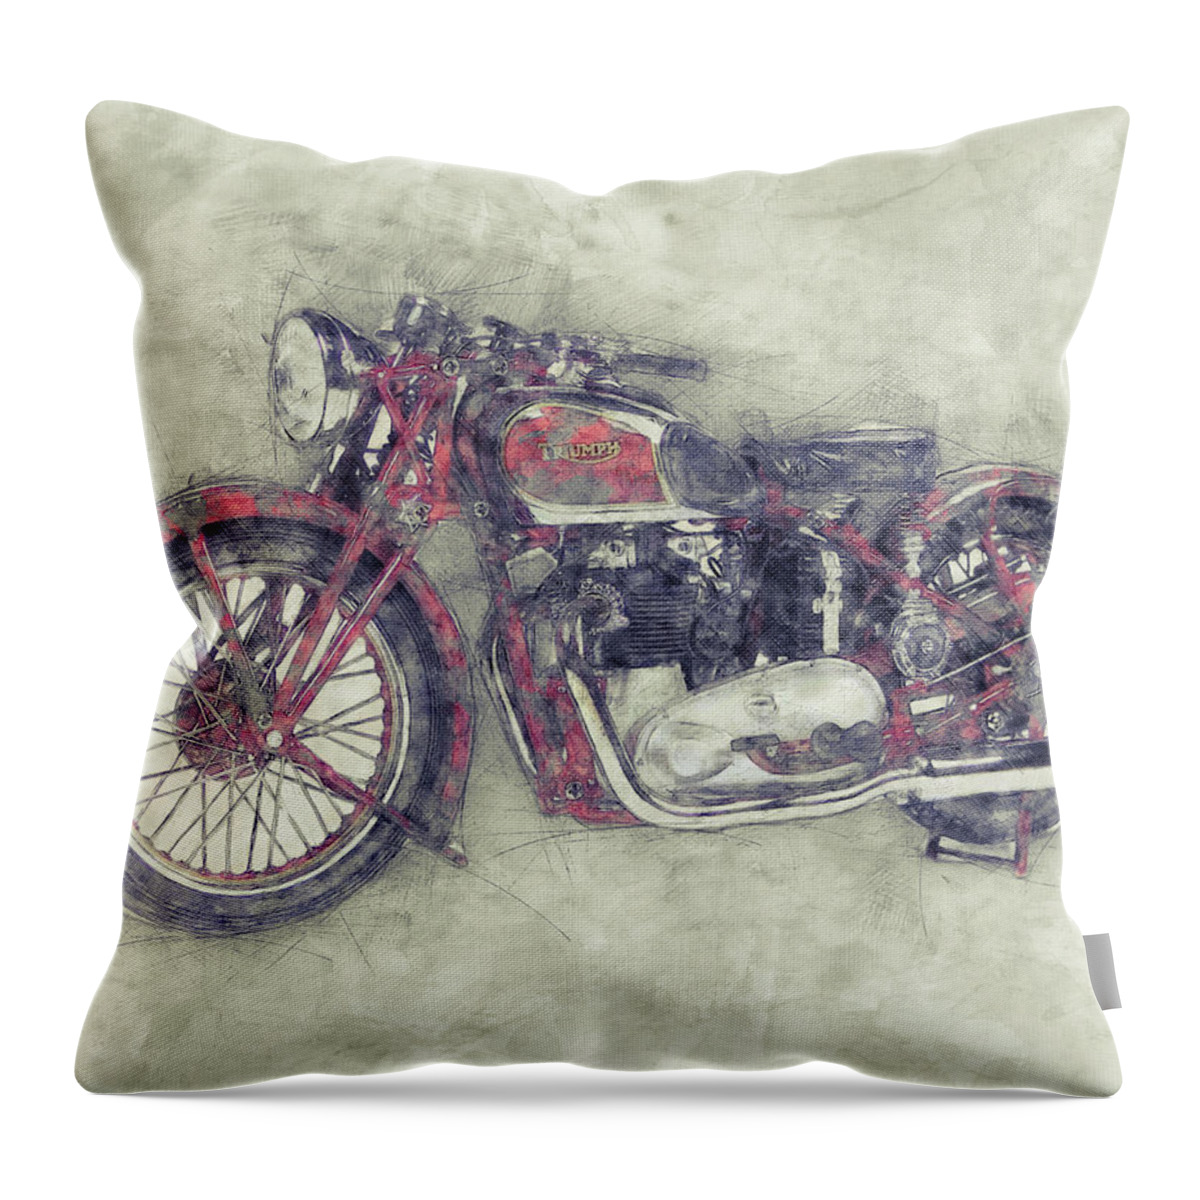 Triumph Speed Twin Throw Pillow featuring the mixed media Triumph Speed Twin 1 - 1937 - Vintage Motorcycle Poster - Automotive Art by Studio Grafiikka